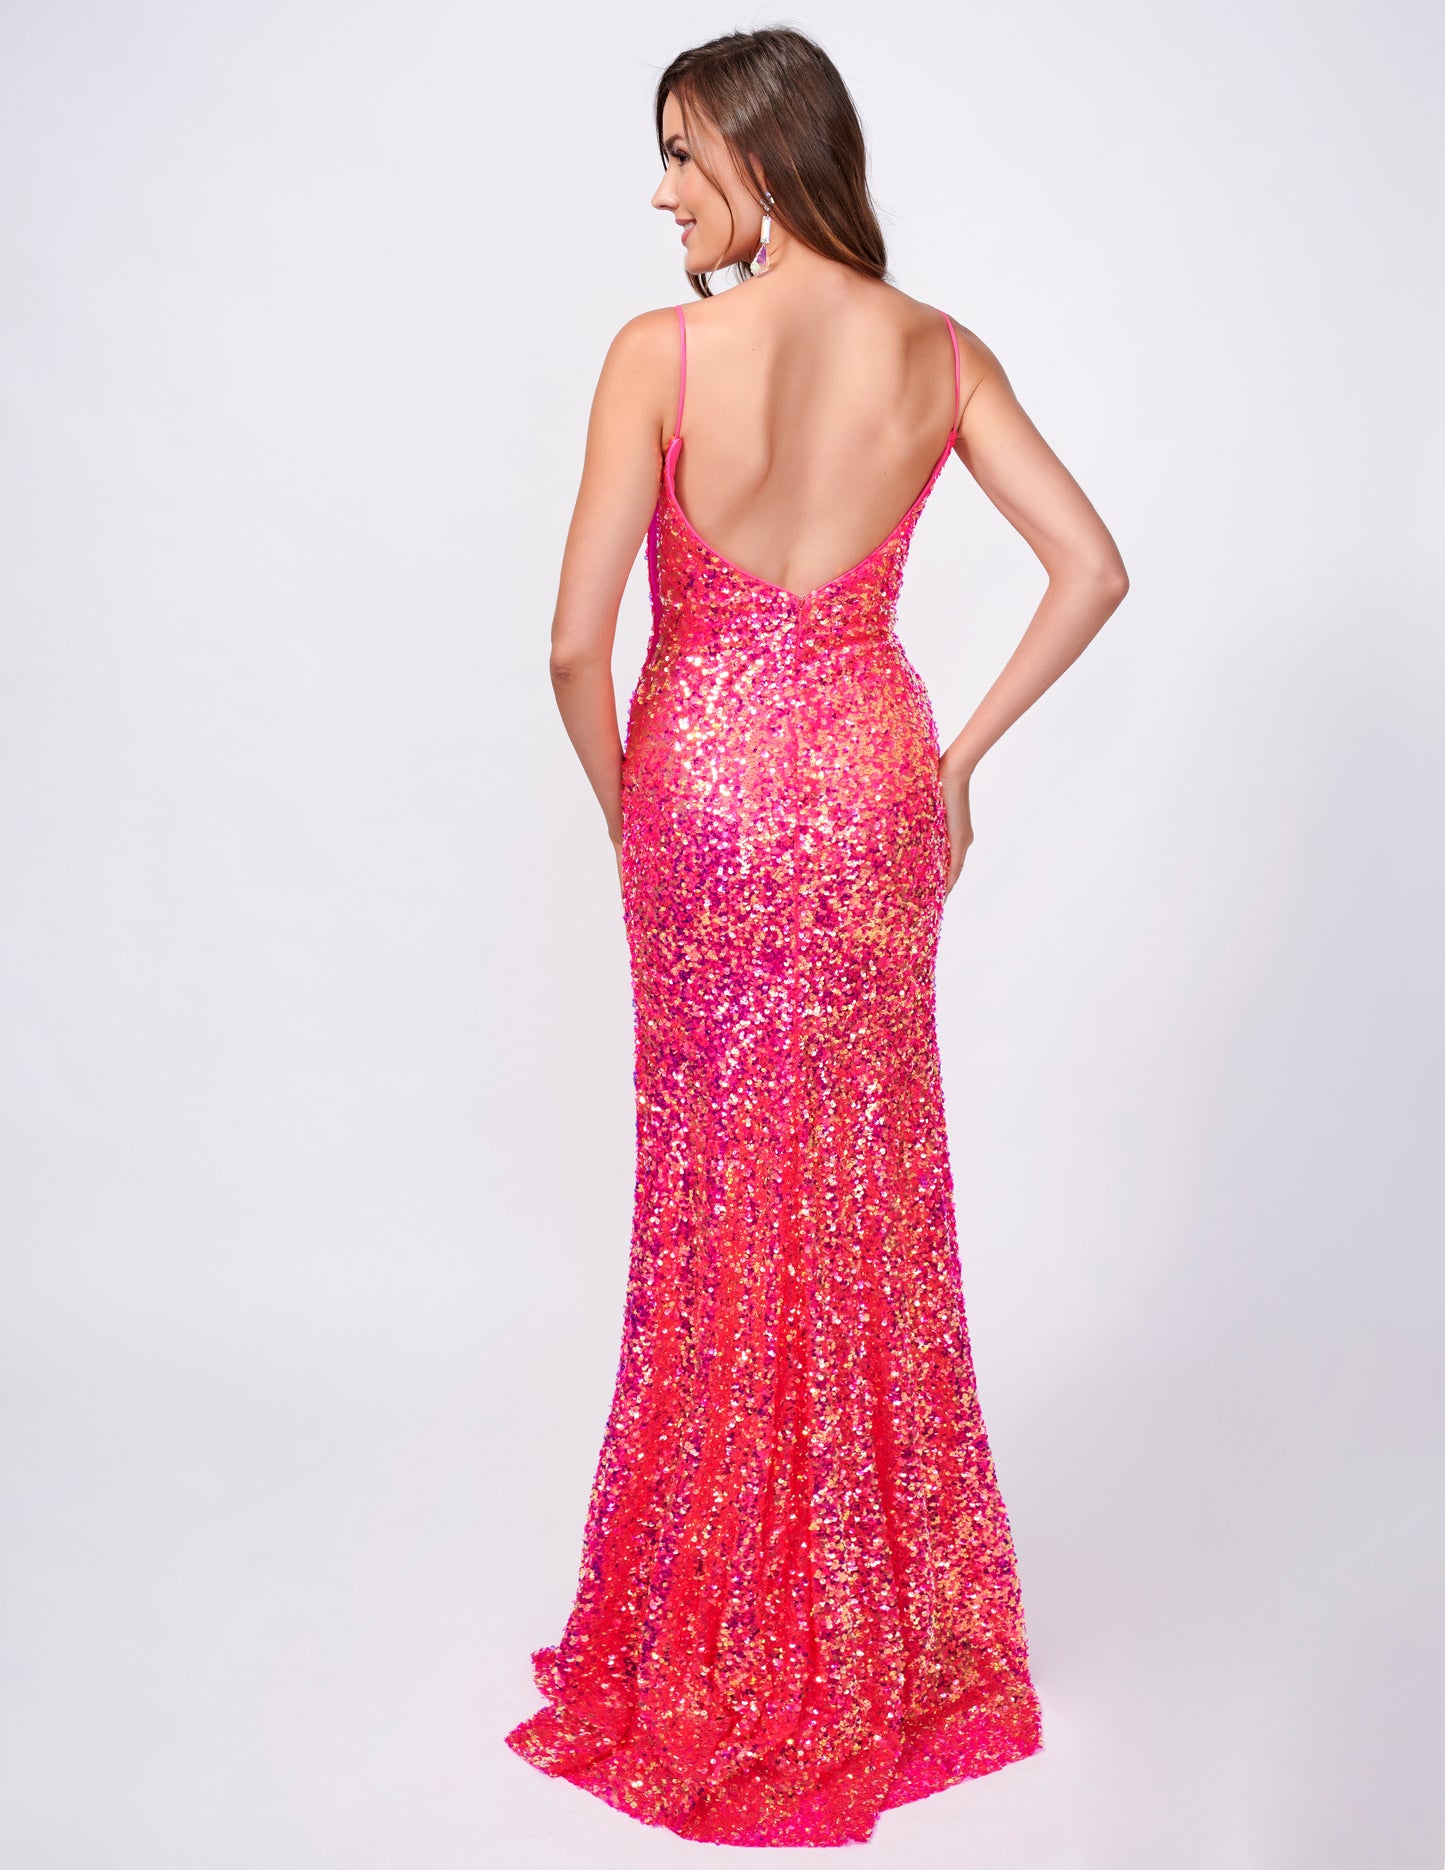 This fitted sequin long prom dress by Nina Canacci 4410 is designed to make you stand out on the dance floor. With a low back and V neck, this elegant gown features a stylish slit that will add an extra touch of sophistication to your look. Perfect for any formal occasion, this dress is sure to make you feel confident and glamorous.